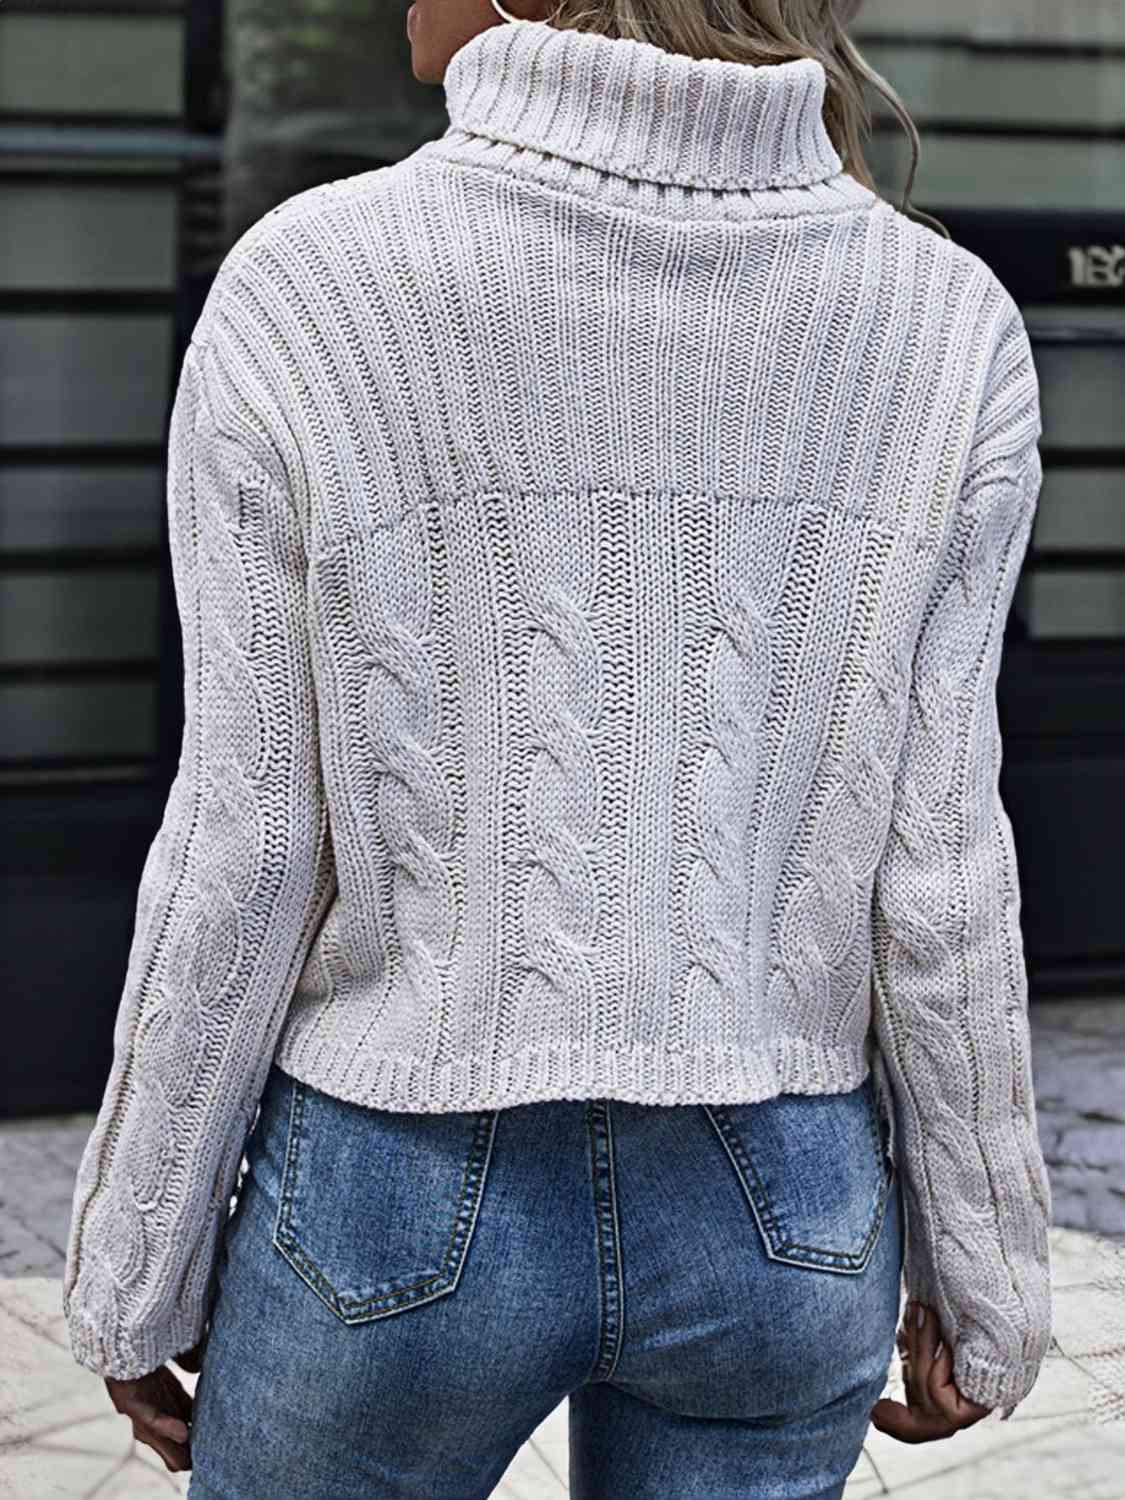 Gray Cable-Knit Turtleneck Sweater Sentient Beauty Fashions Apparel & Accessories